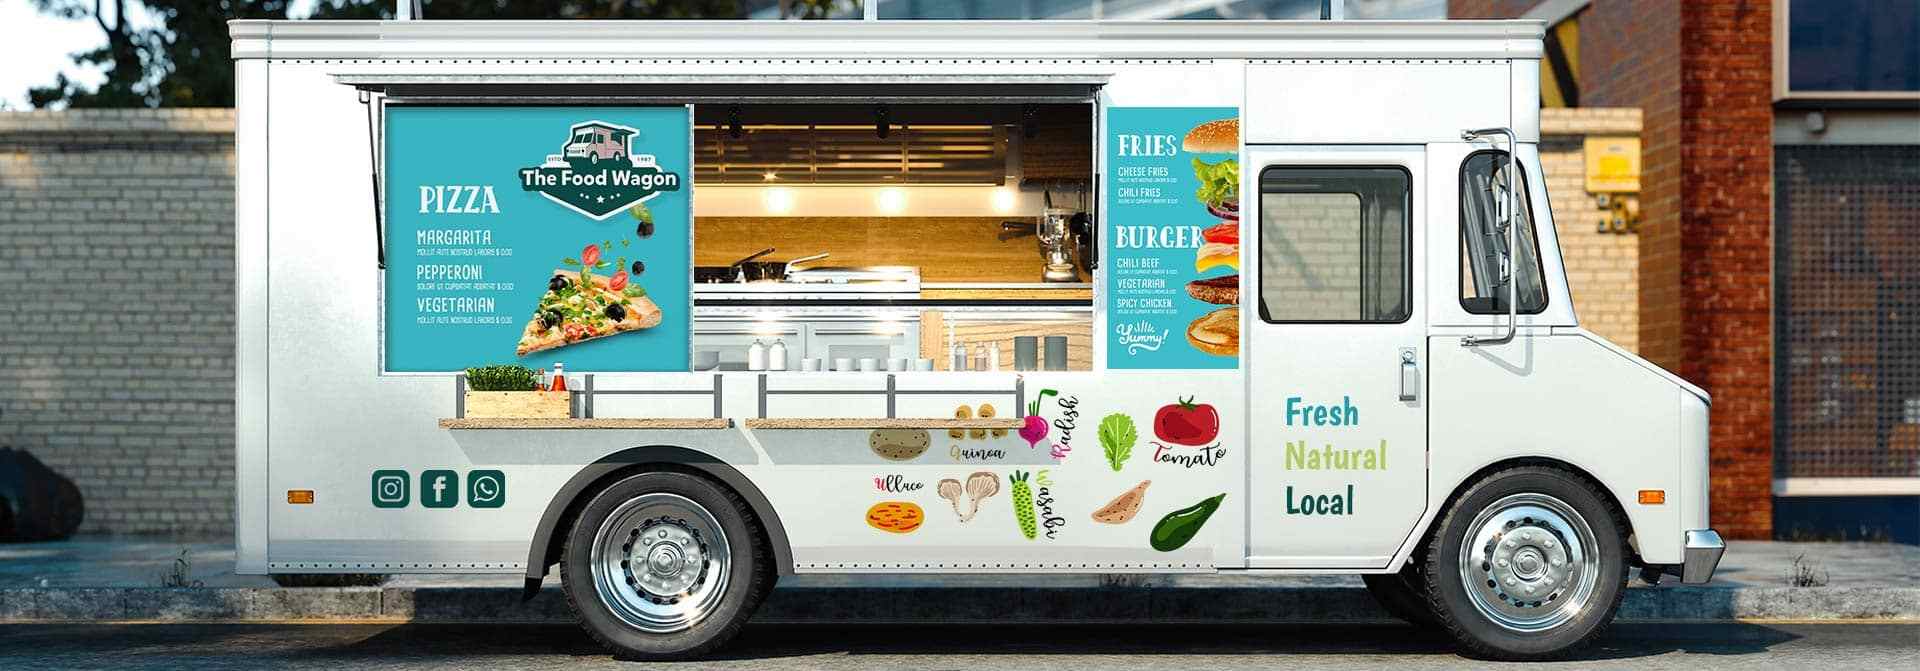 The Food Wagon truck branding displaying the brand name and colorful food images